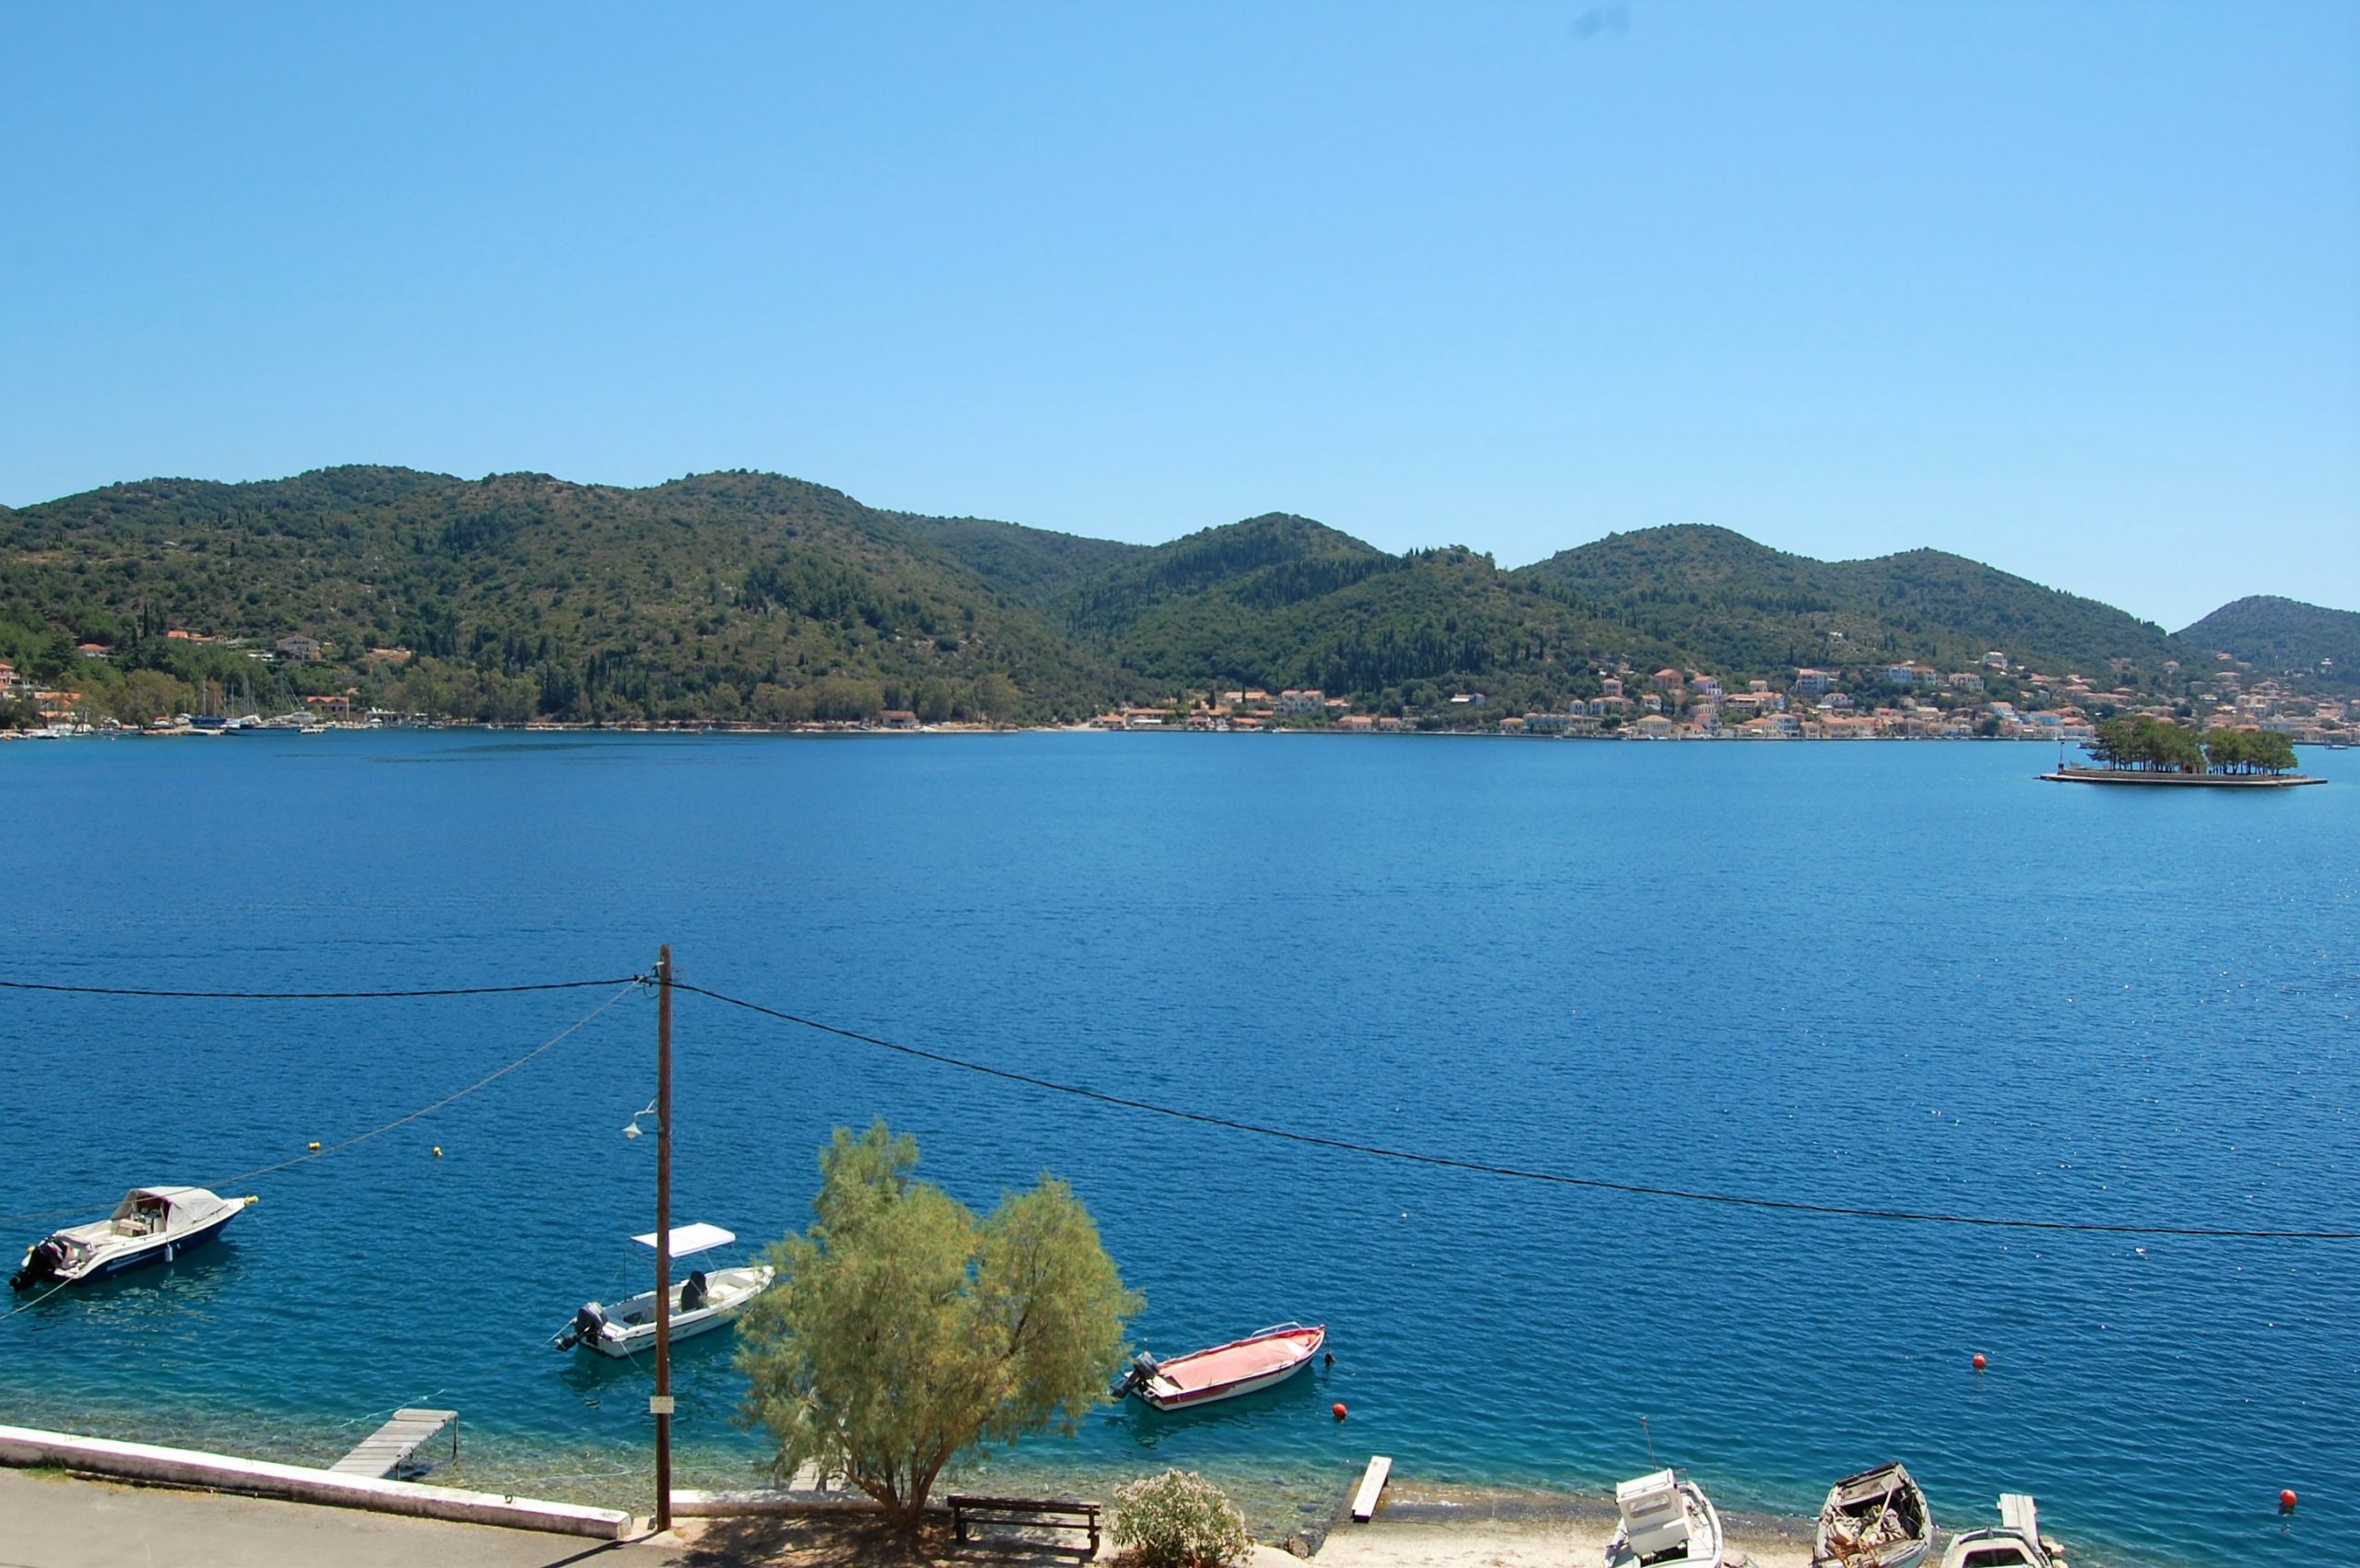 Bay view of Vathi harbour from a rental property in Ithaca Greece